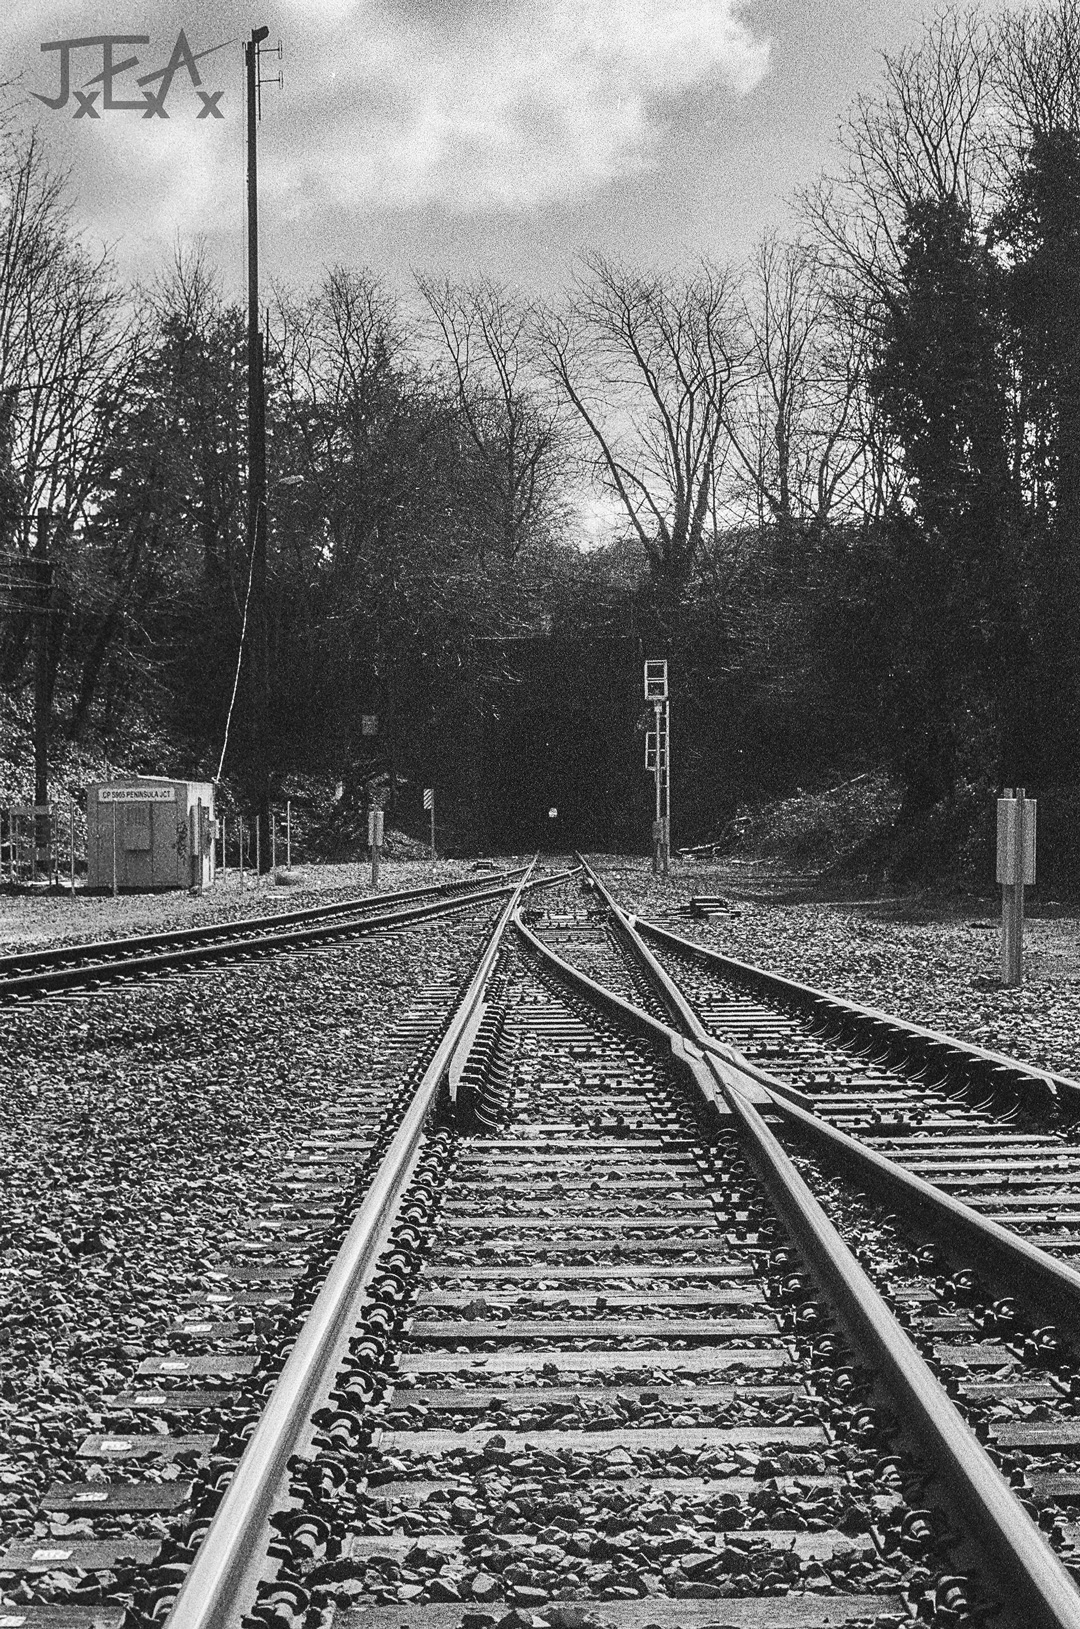 A black and white photo of three sets of train tracks leading into a one track tunnel.